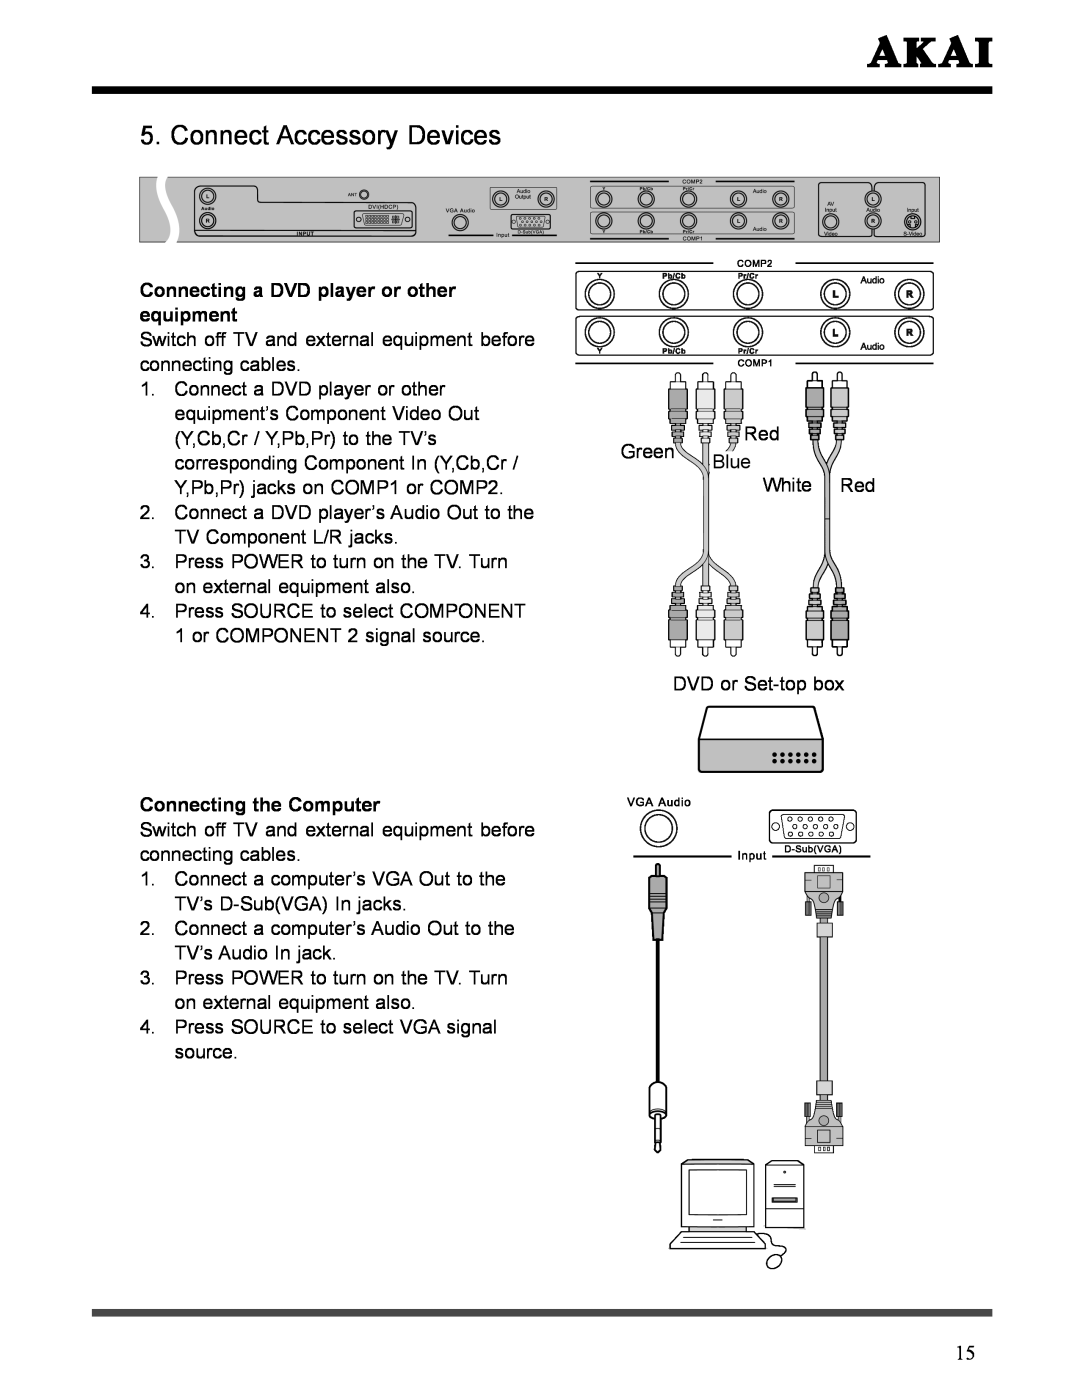 Akai LCT3226 manual Connect Accessory Devices, Connecting a DVD player or other equipment, Connecting the Computer 